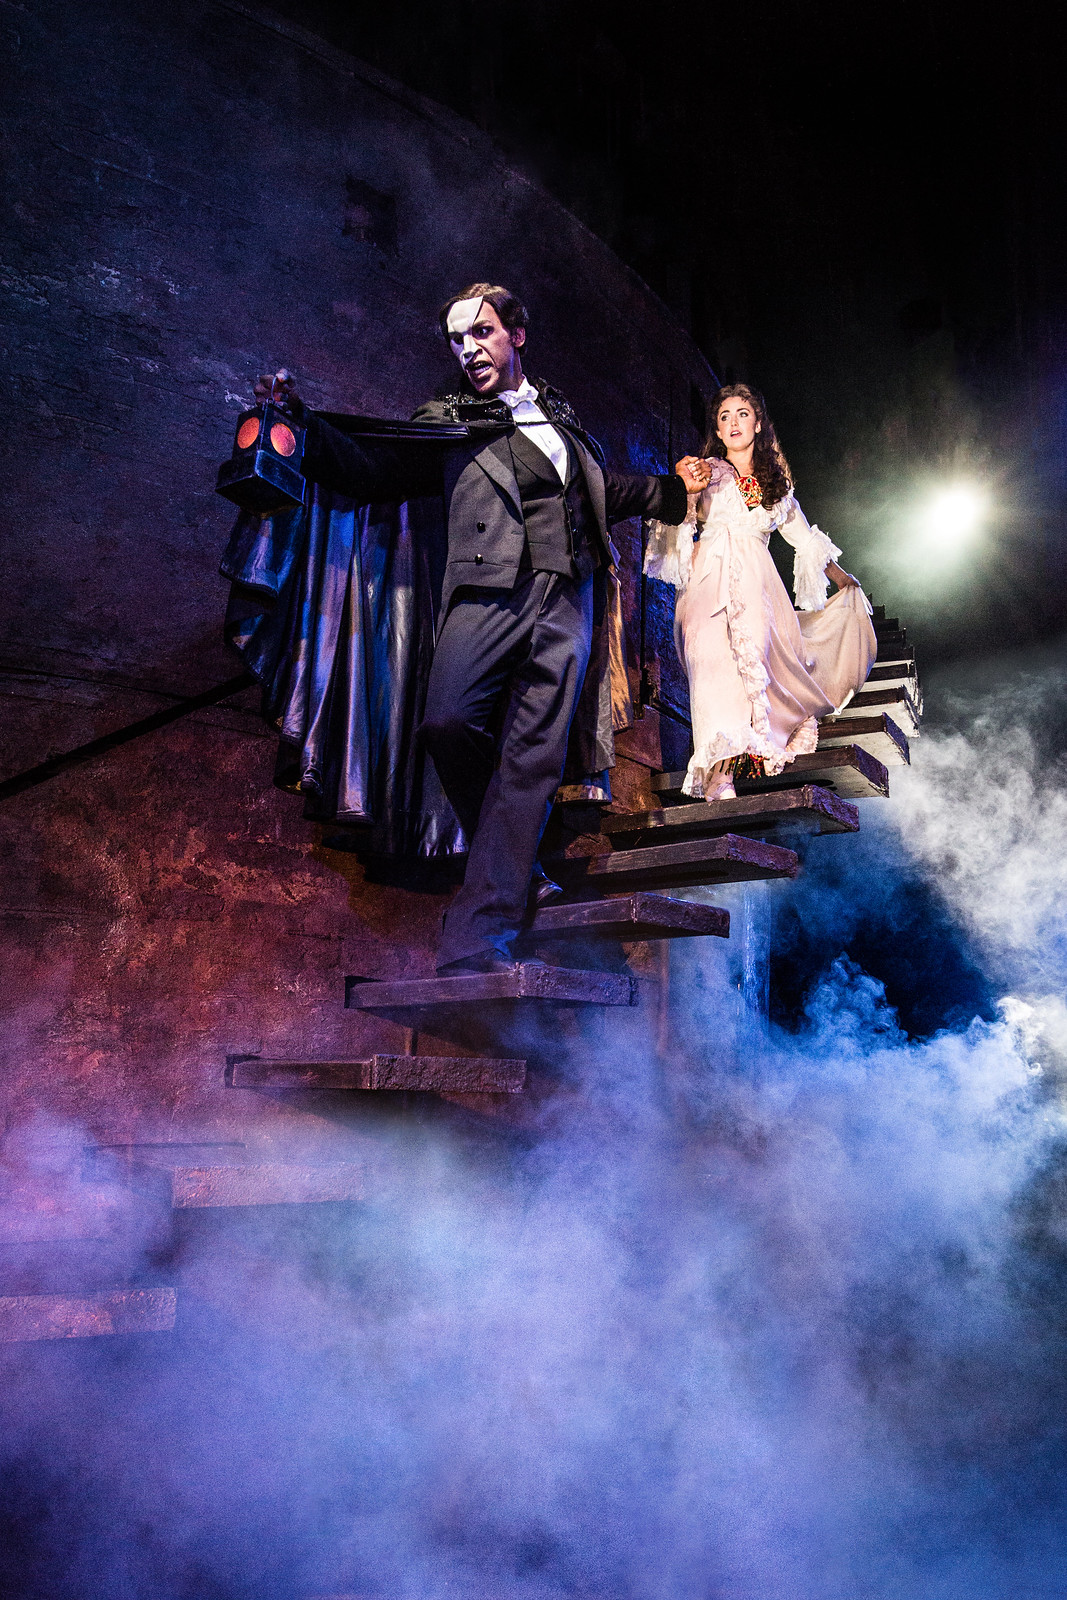 Broadway in Detroit: The Phantom Of The Opera at the Detroit Opera House January 24 - February 3, 2019 | via Wading in Big Shoes